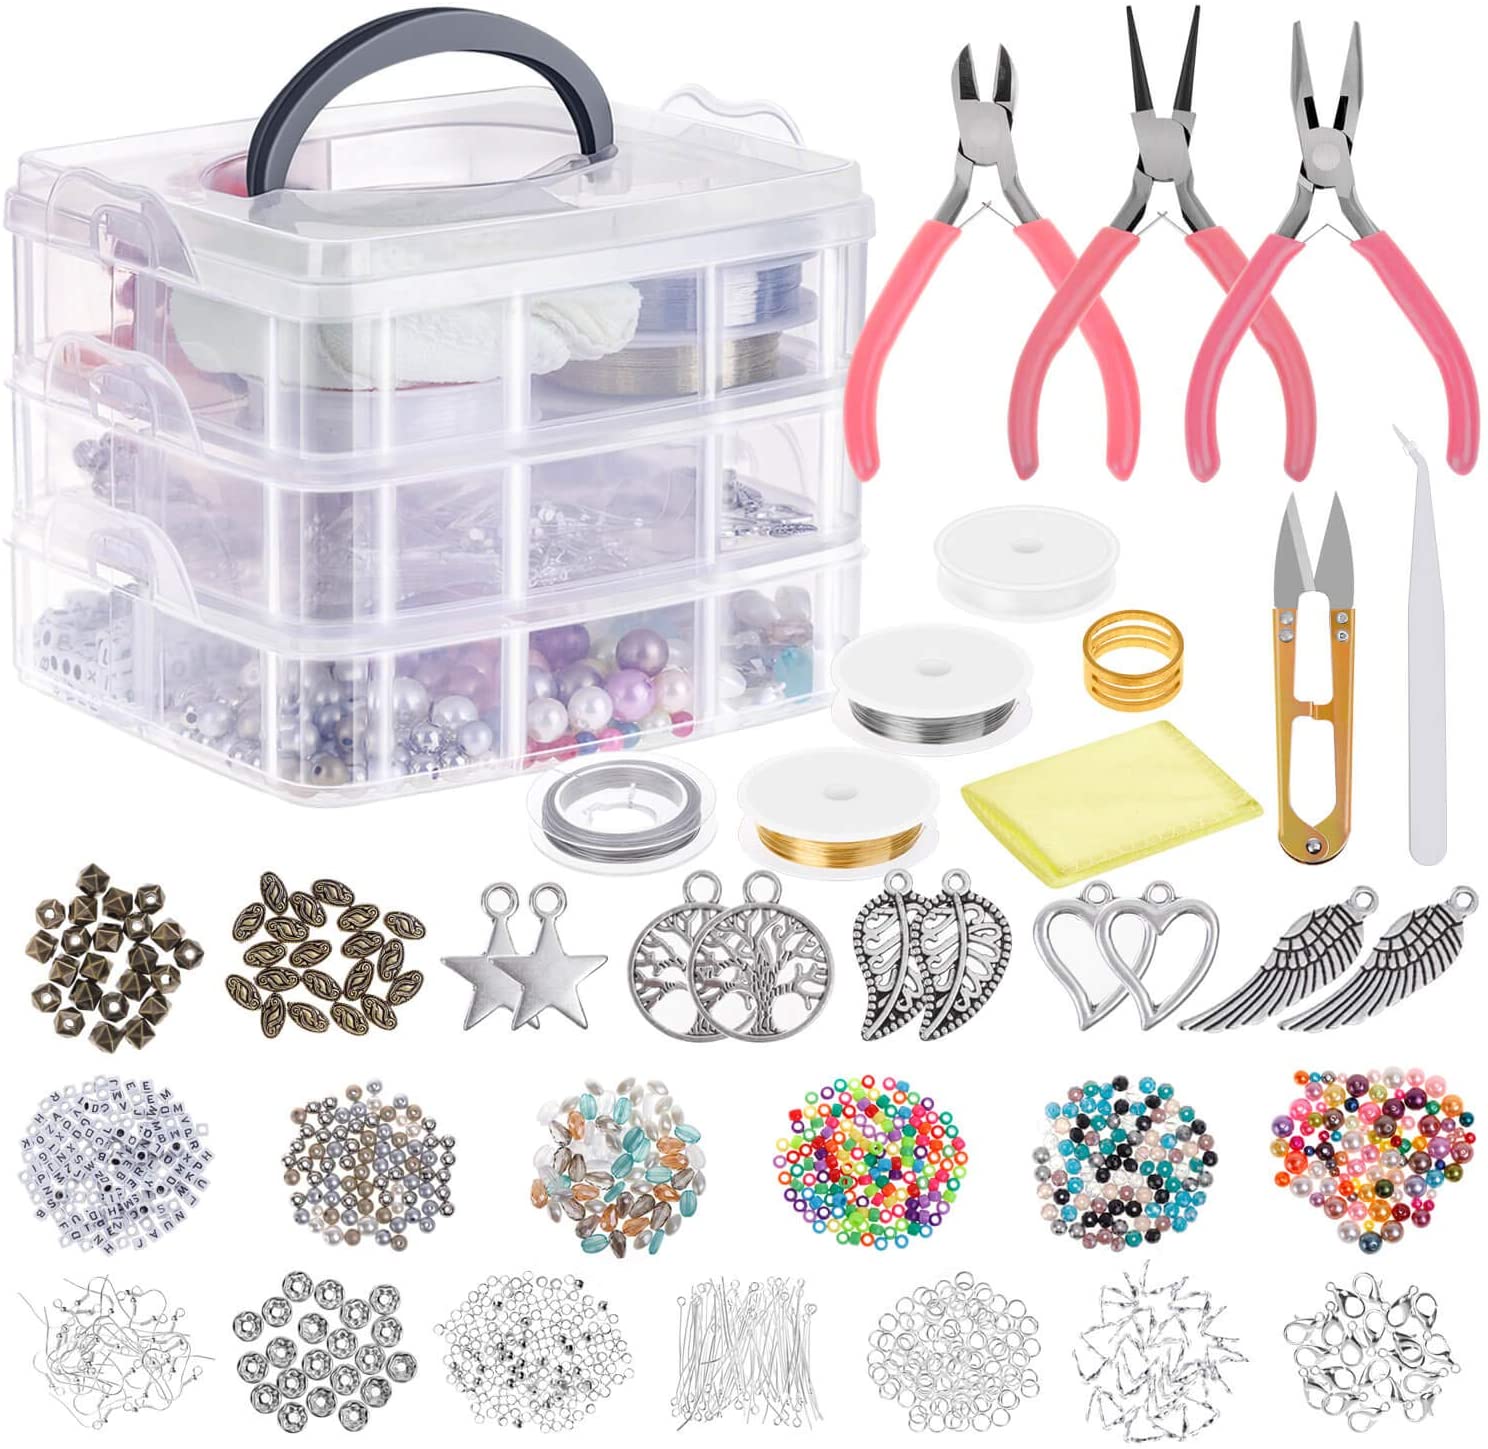 GCP Products Jewelry Making Supplies, Jewelry Making Tools Kit with Jewelry Pliers, Beading Wire, Jewelry Beads and Charms Fin